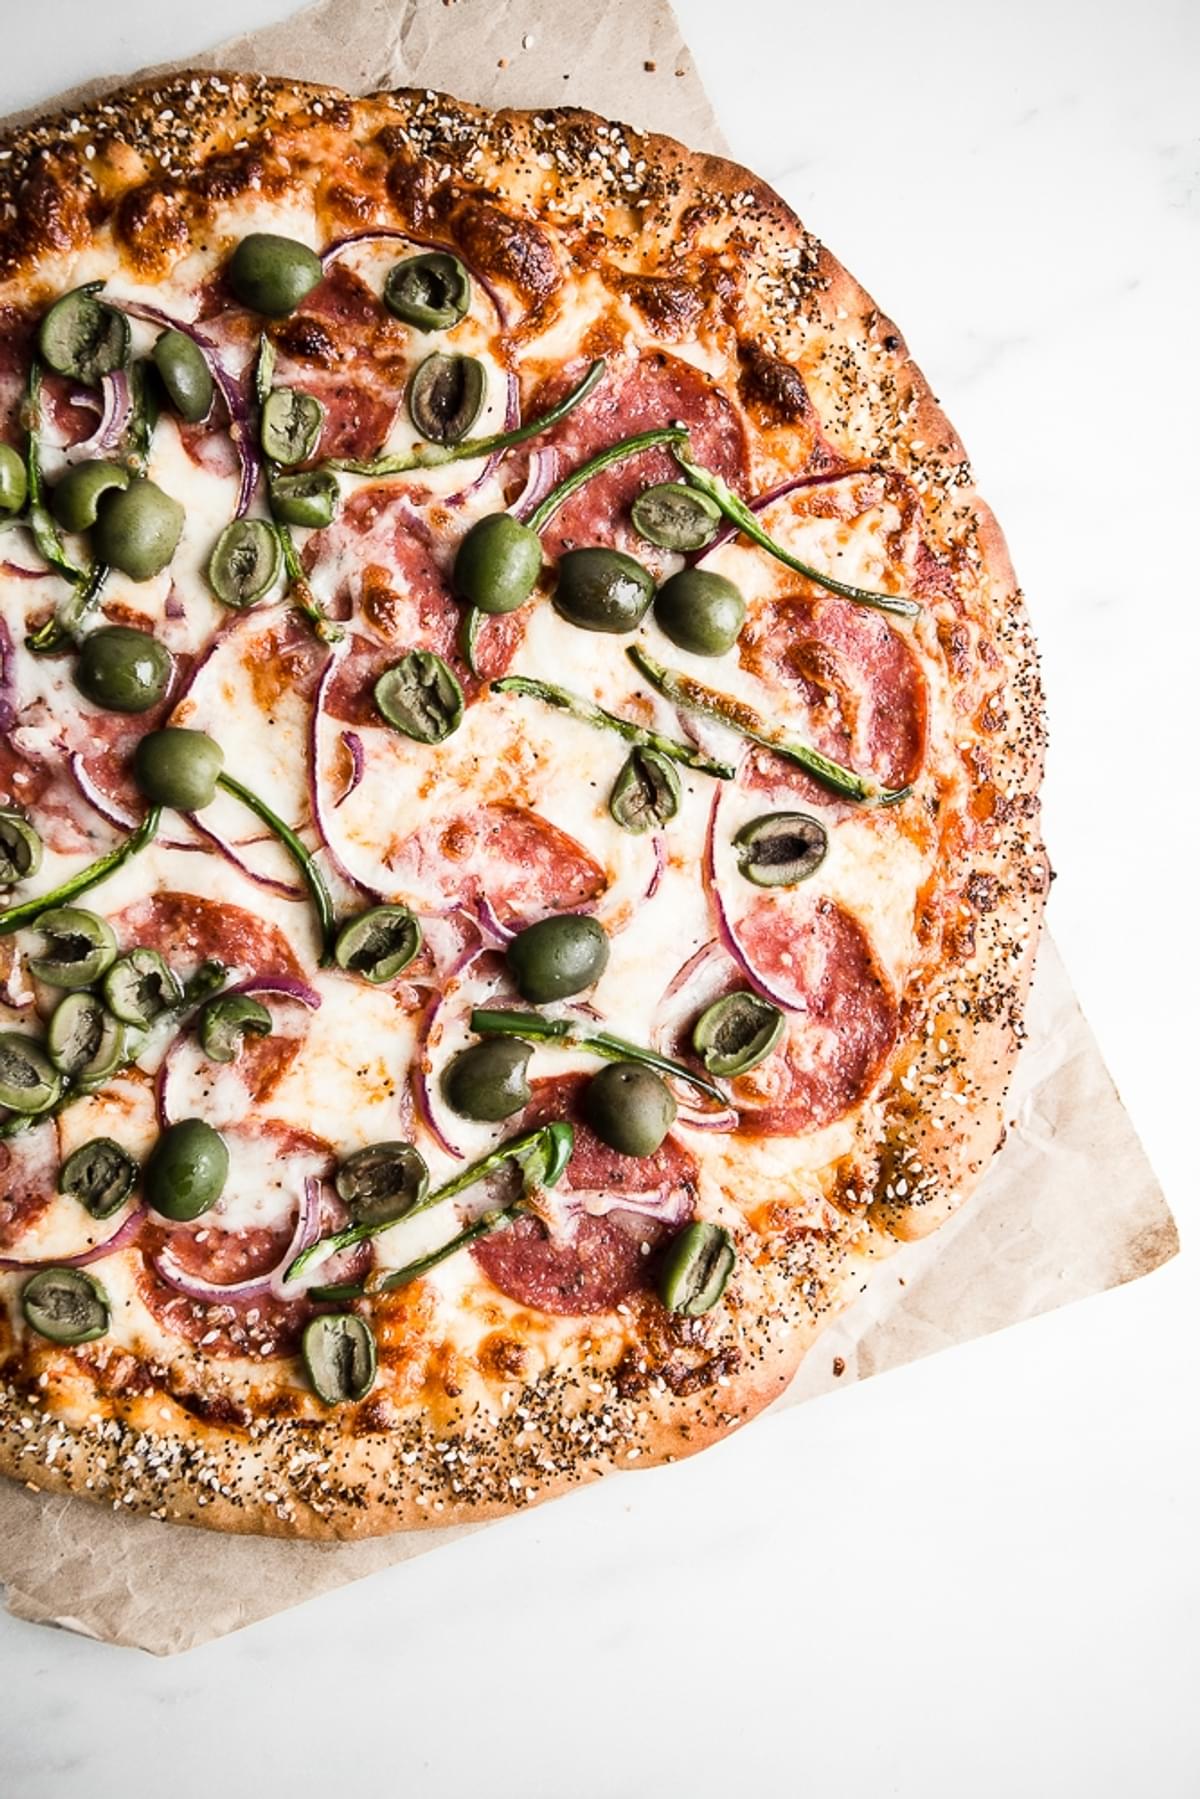 Salami, Jalapeño & Olive Pizza with Honey, jalapeños, red onions and everything bagel crust